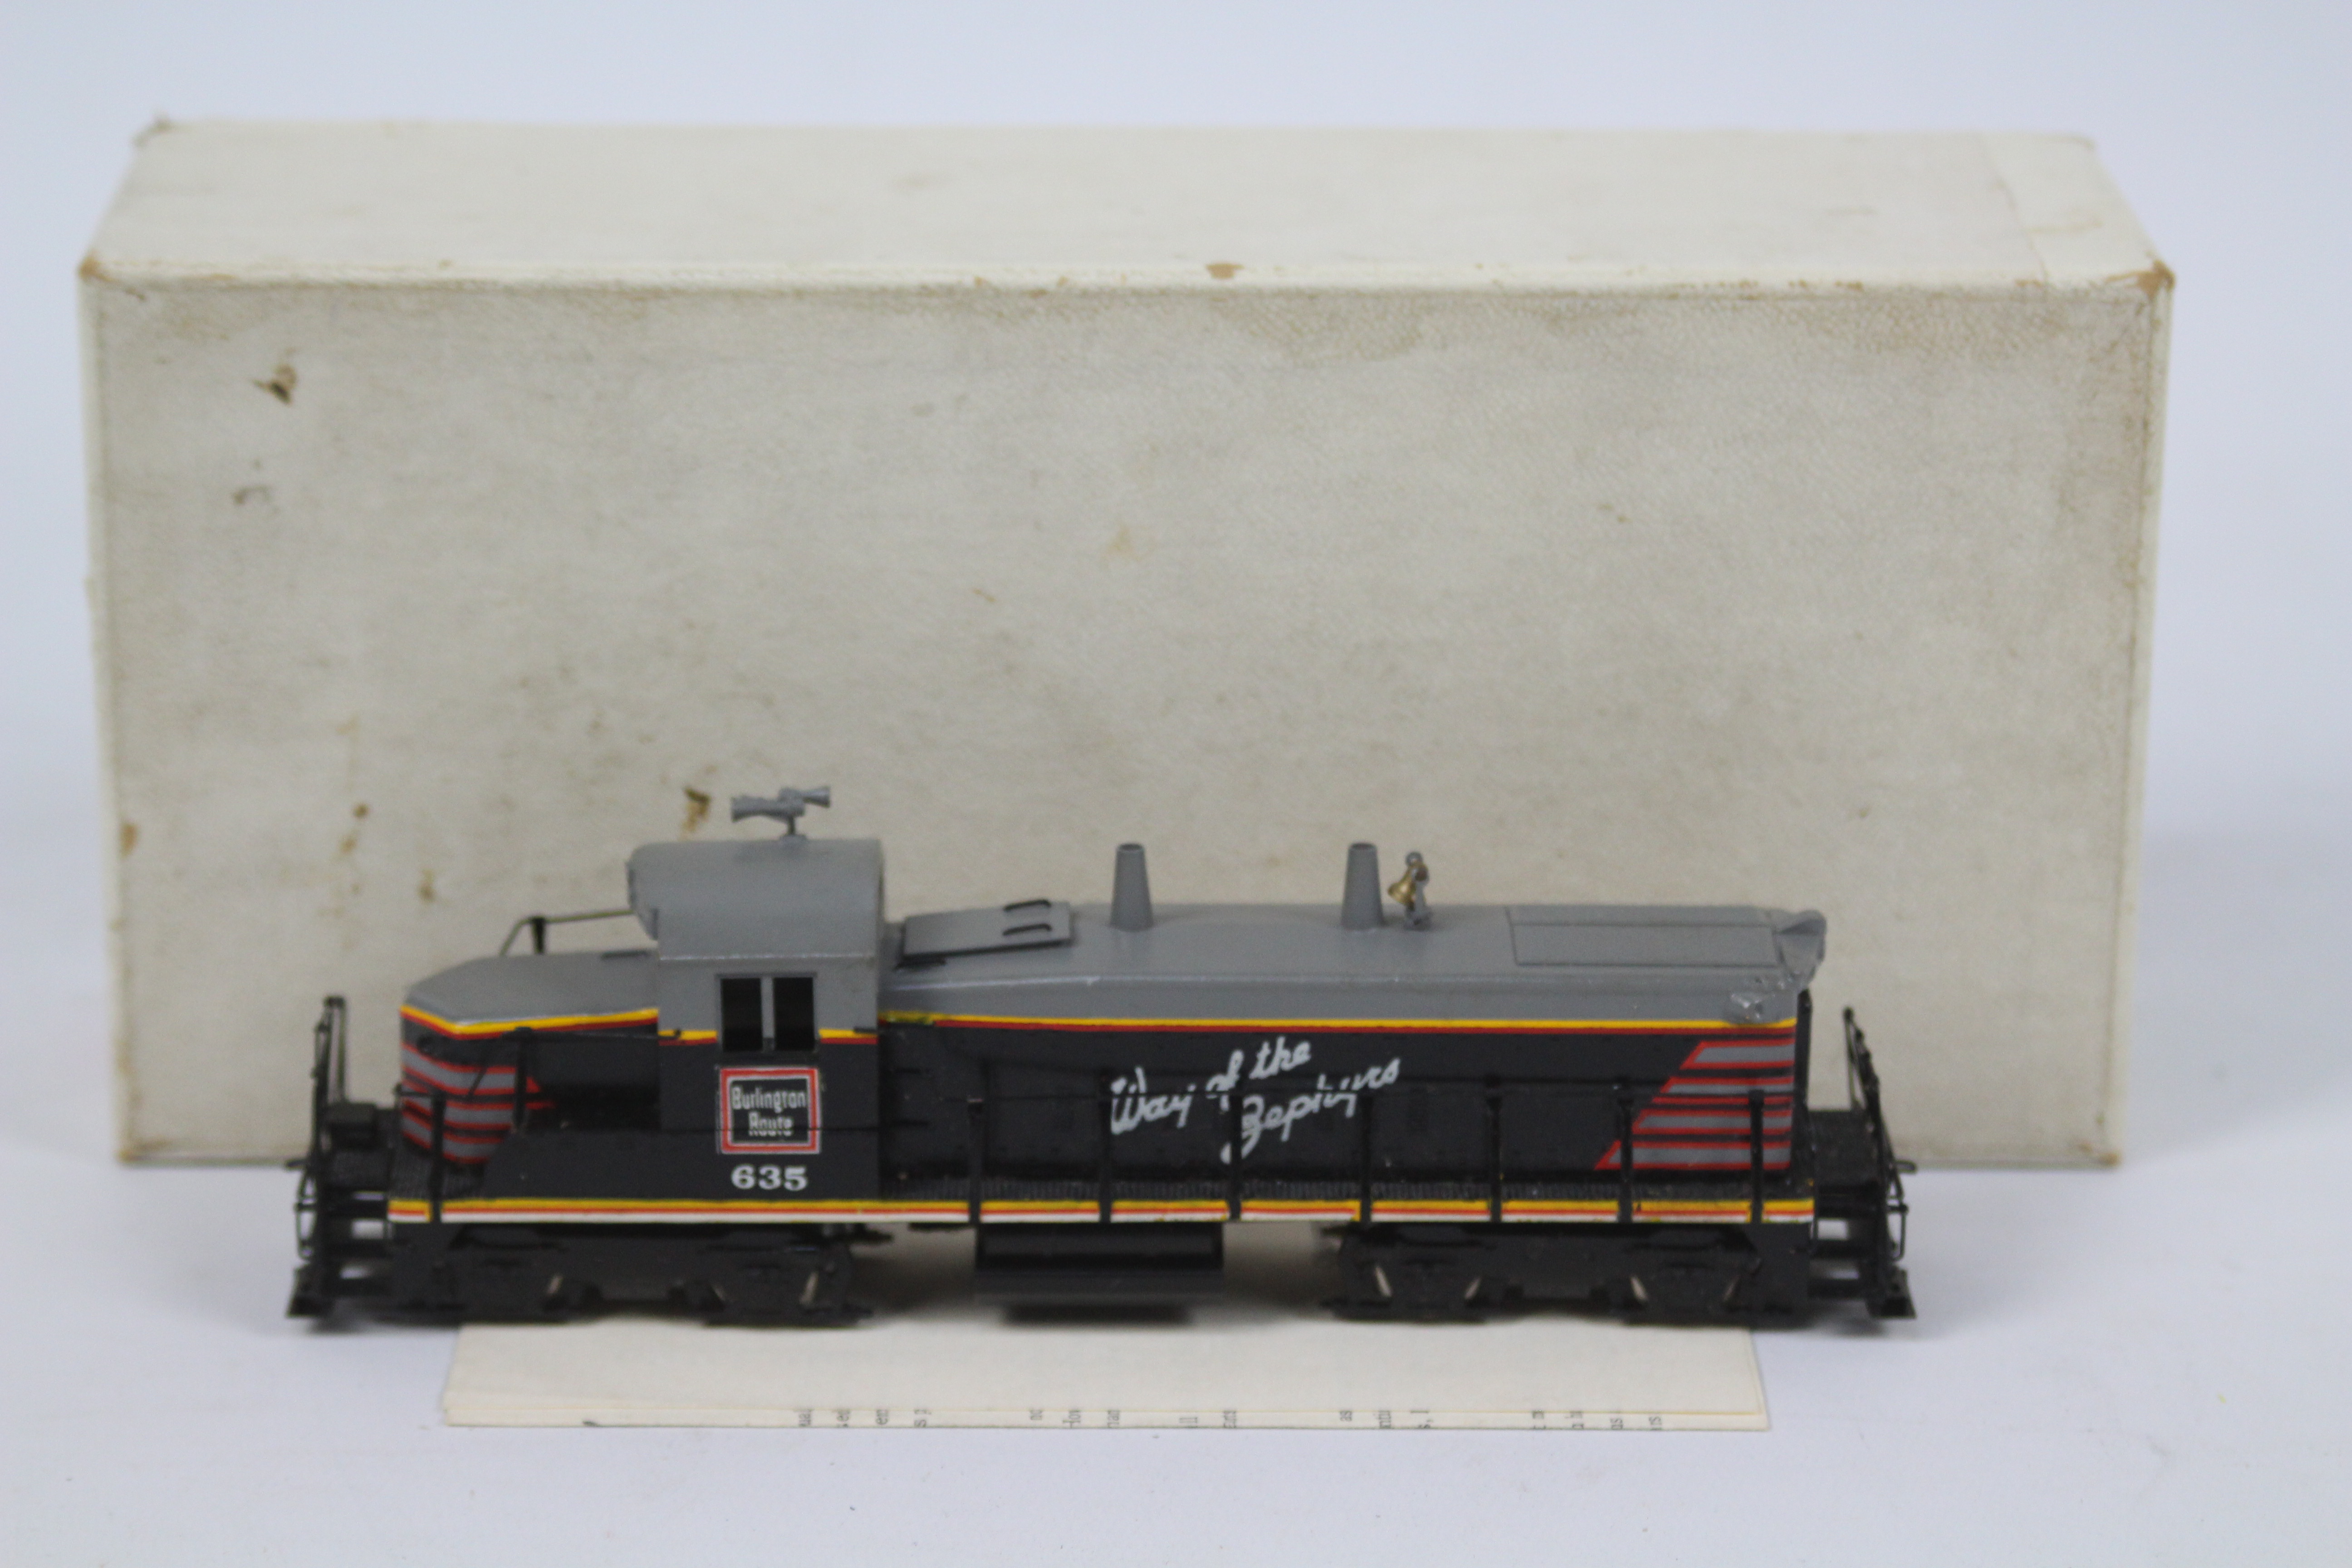 Trains Incorporated - A boxed Trains Incorporated HO gauge EMD RS-1325 brass American diesel